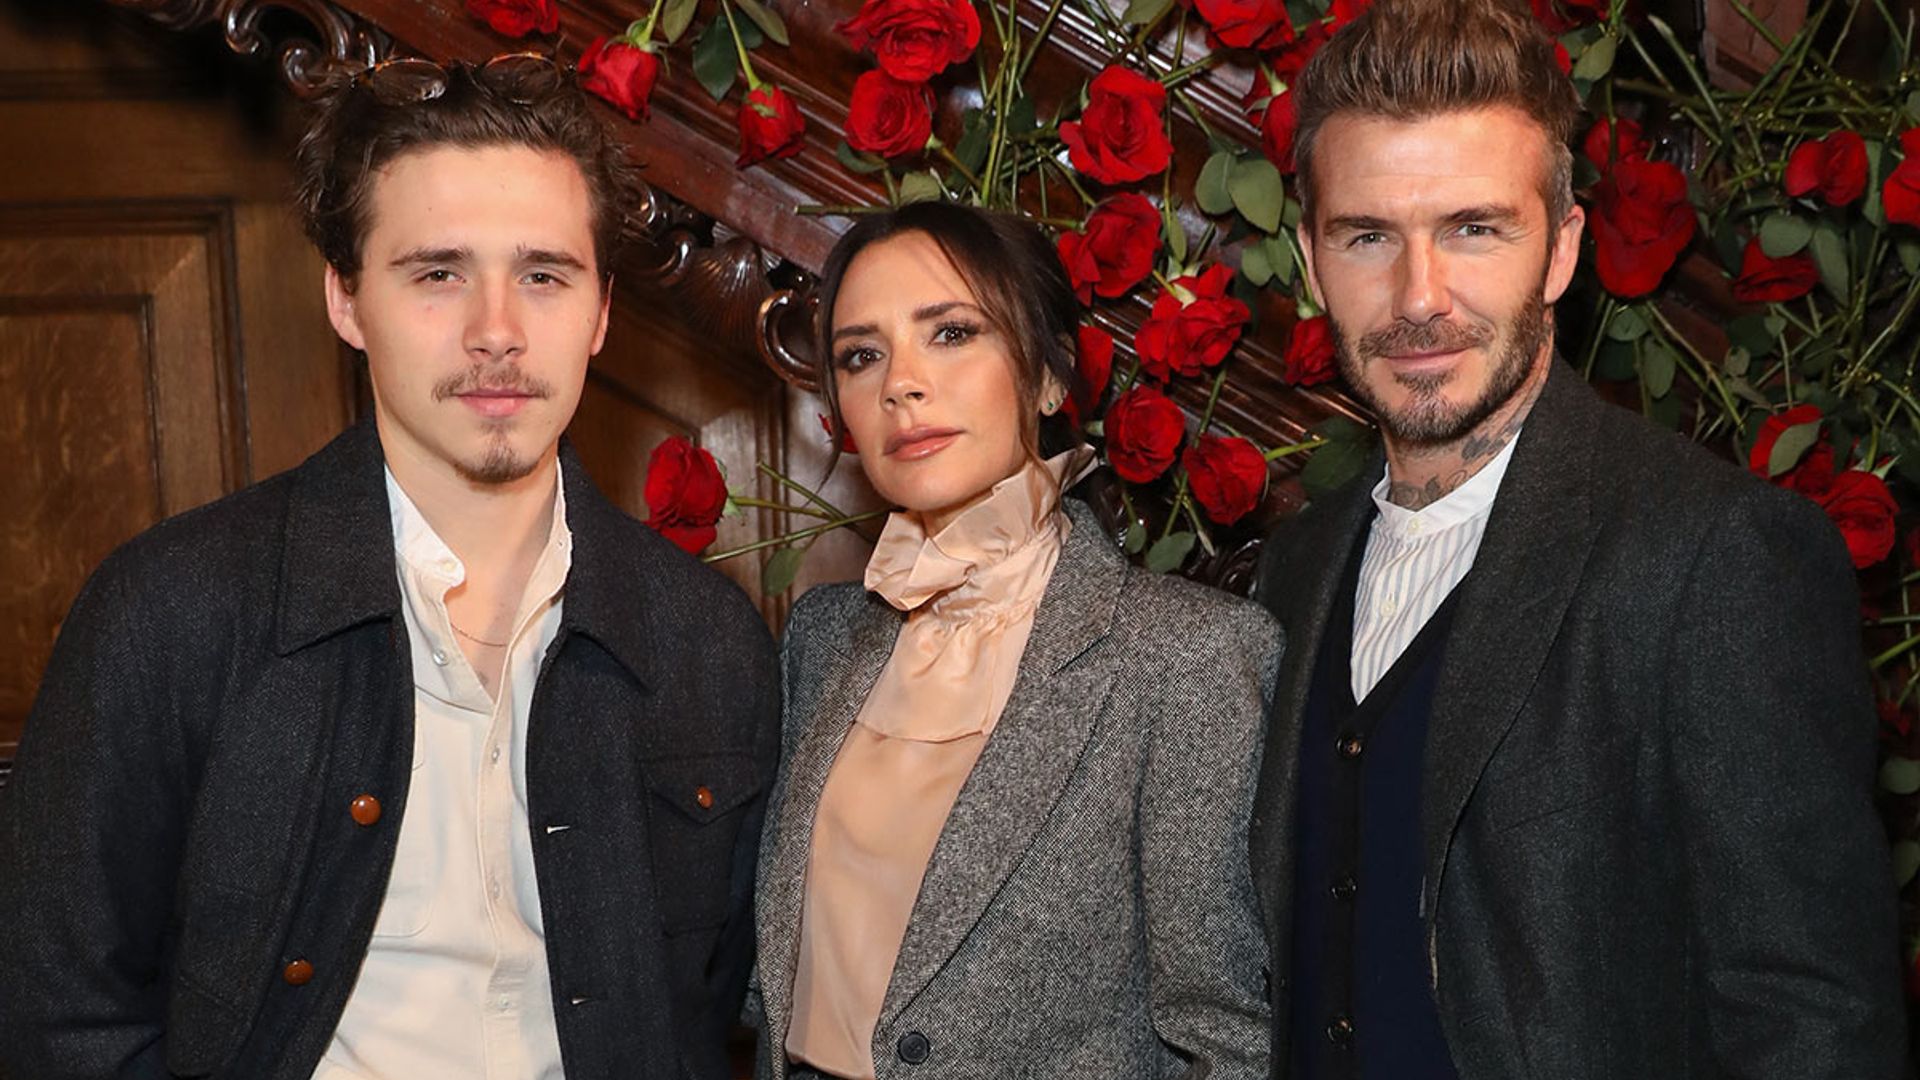 Brooklyn Beckham makes TV cooking debut and parents David and Victoria are so proud - watch